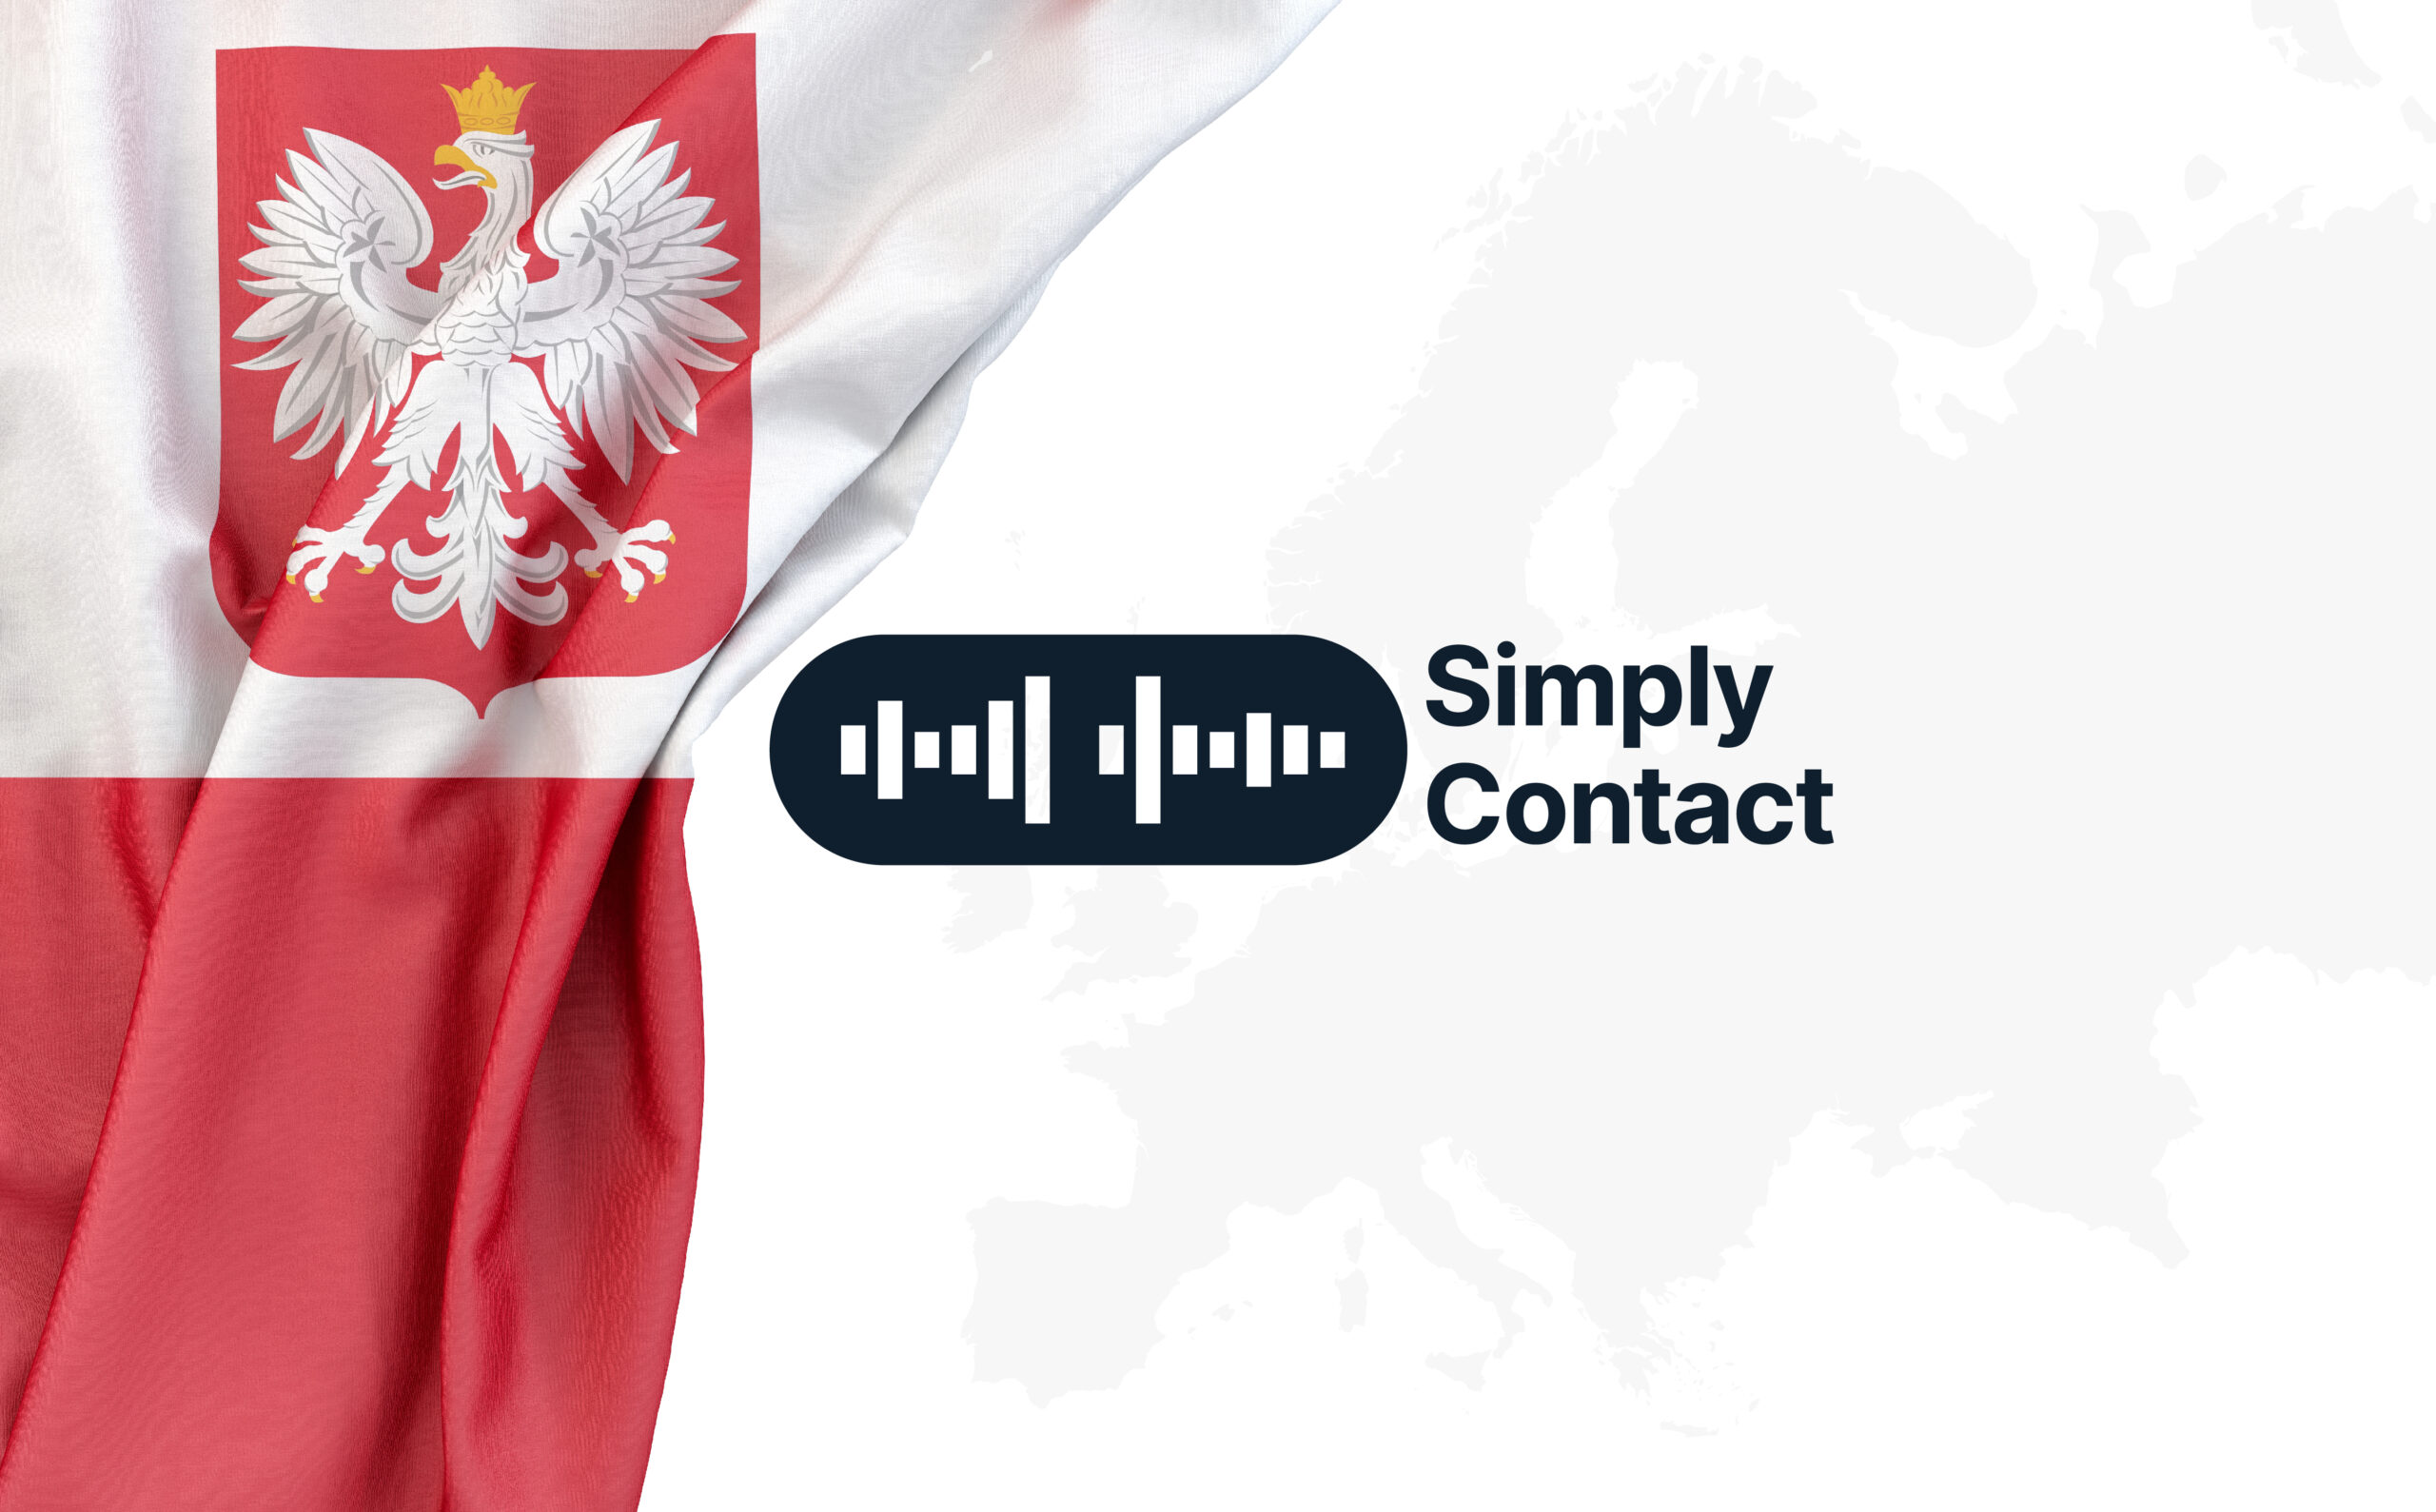 Simply Contact has launched an office in Poland